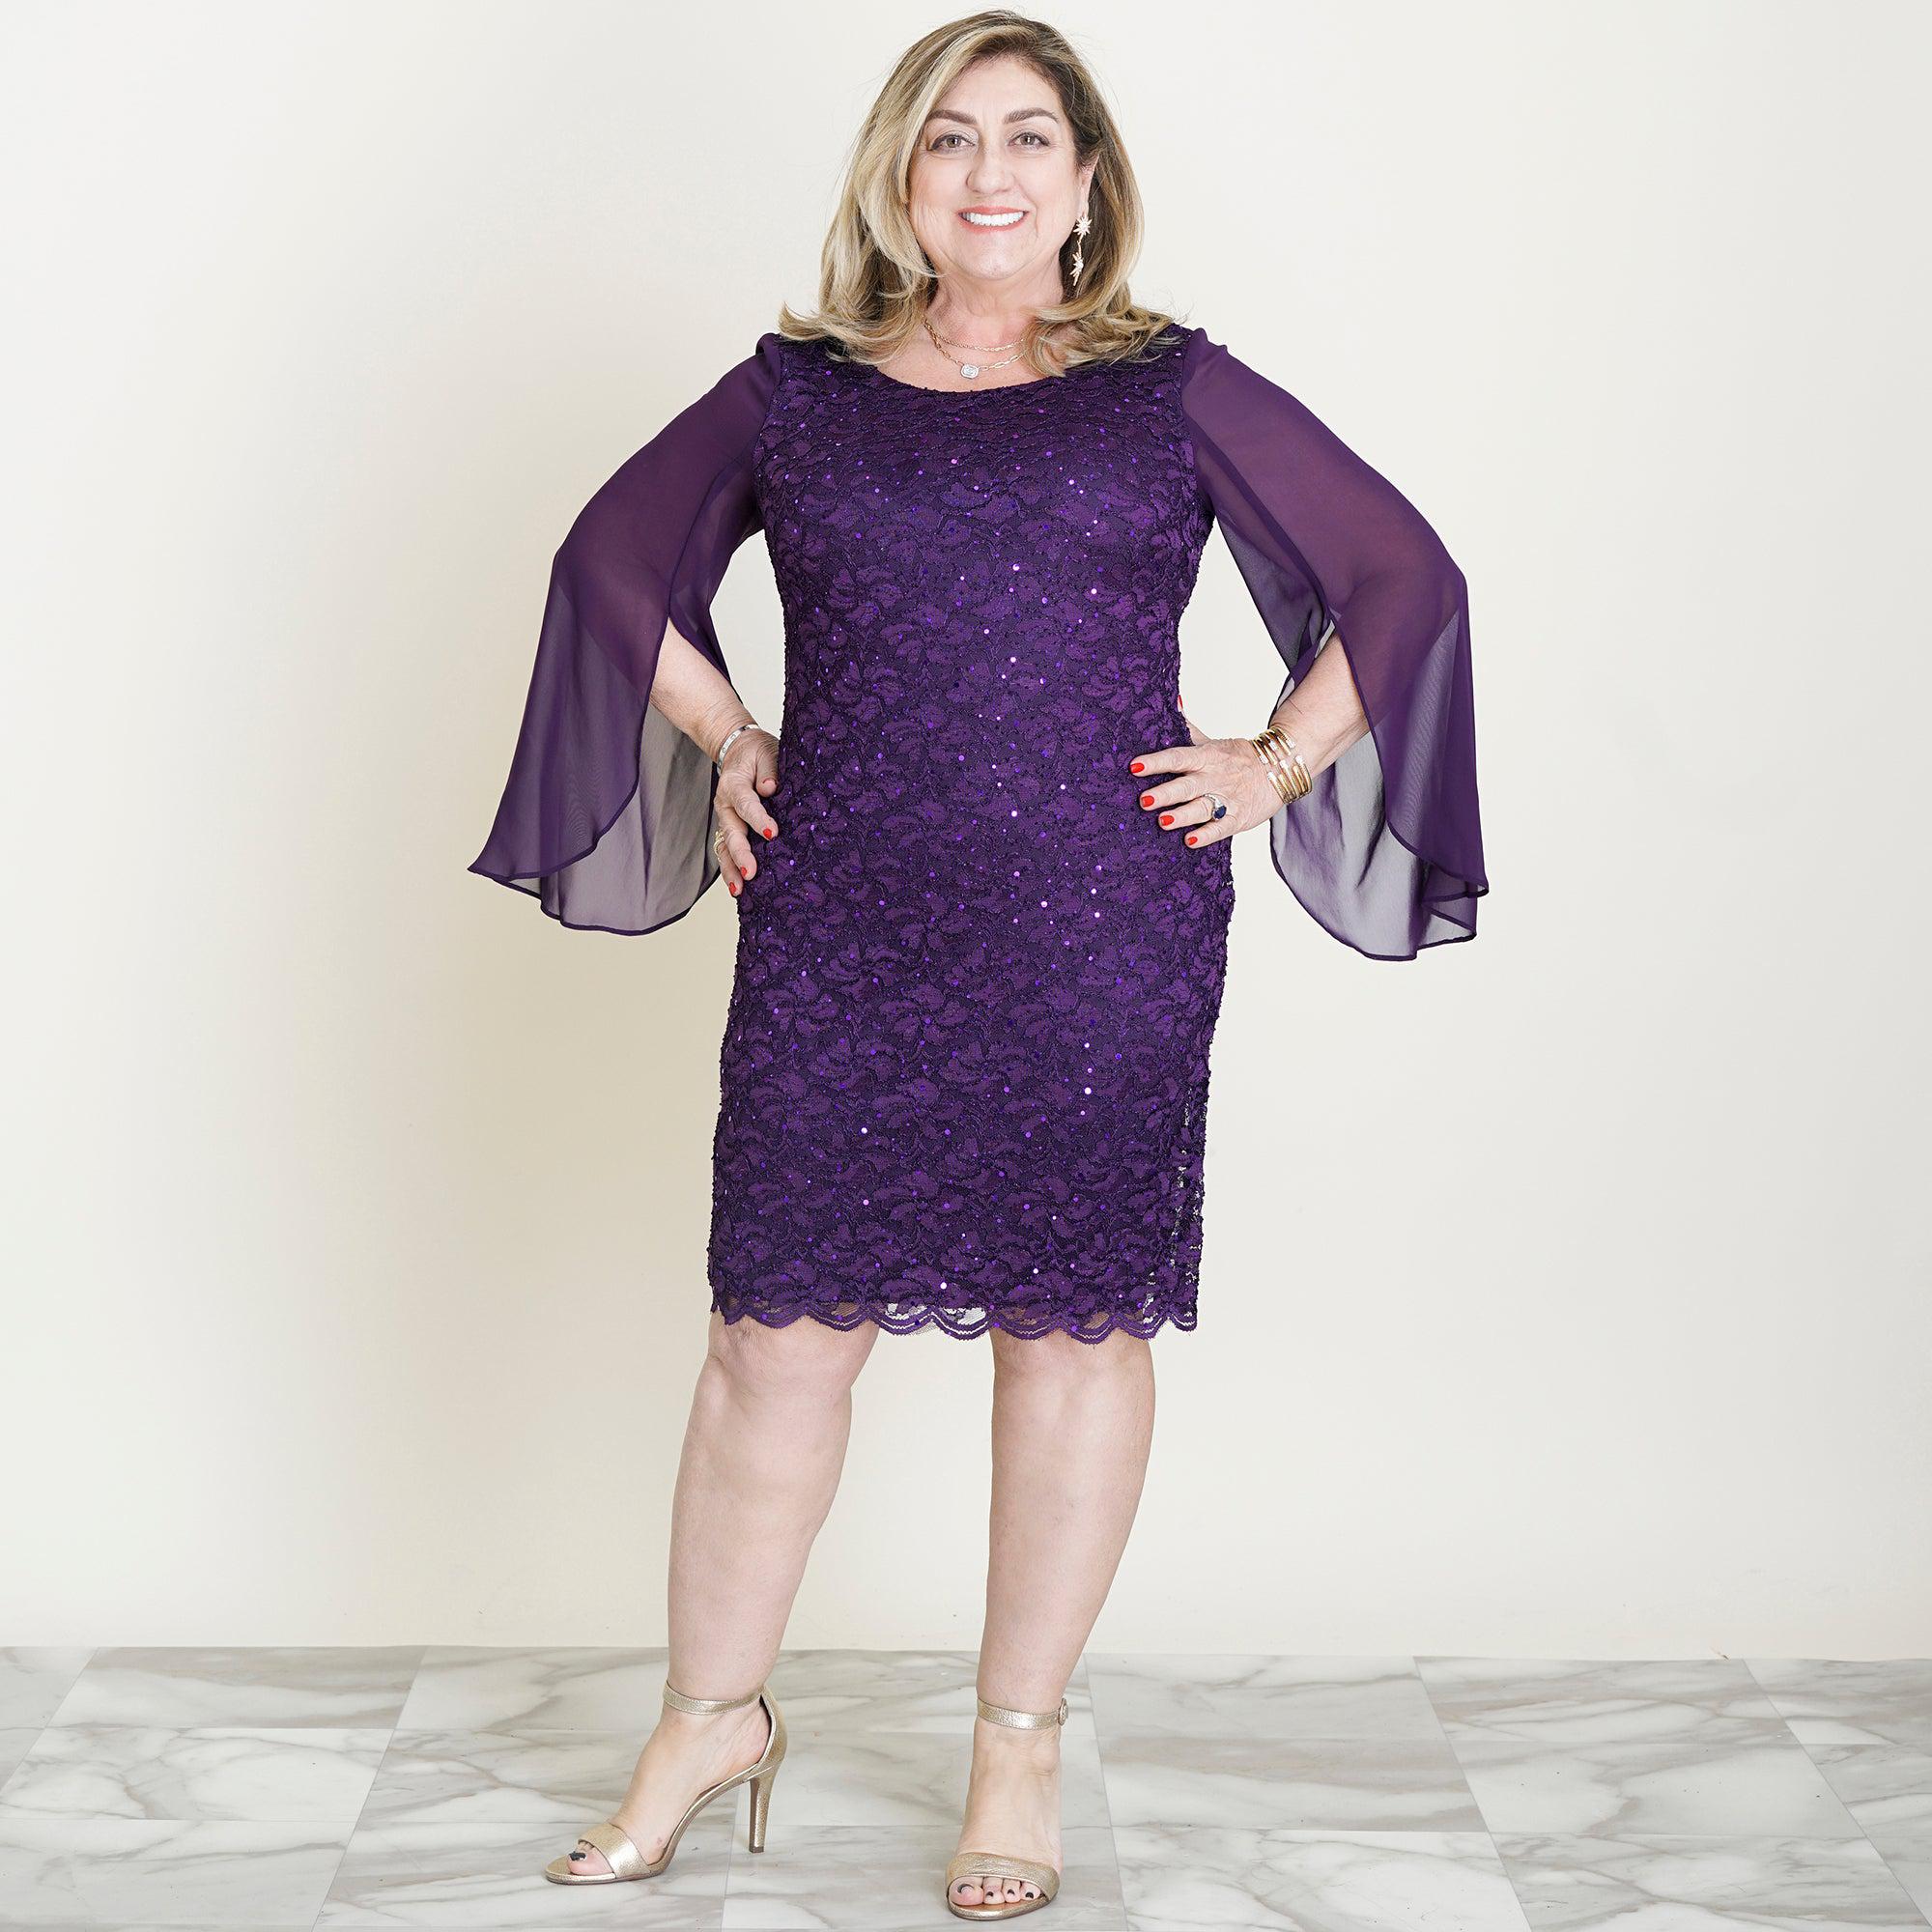 Woman posing wearing Aubergine Stevie Aubergine Sequin Lace Dress from Connected Apparel